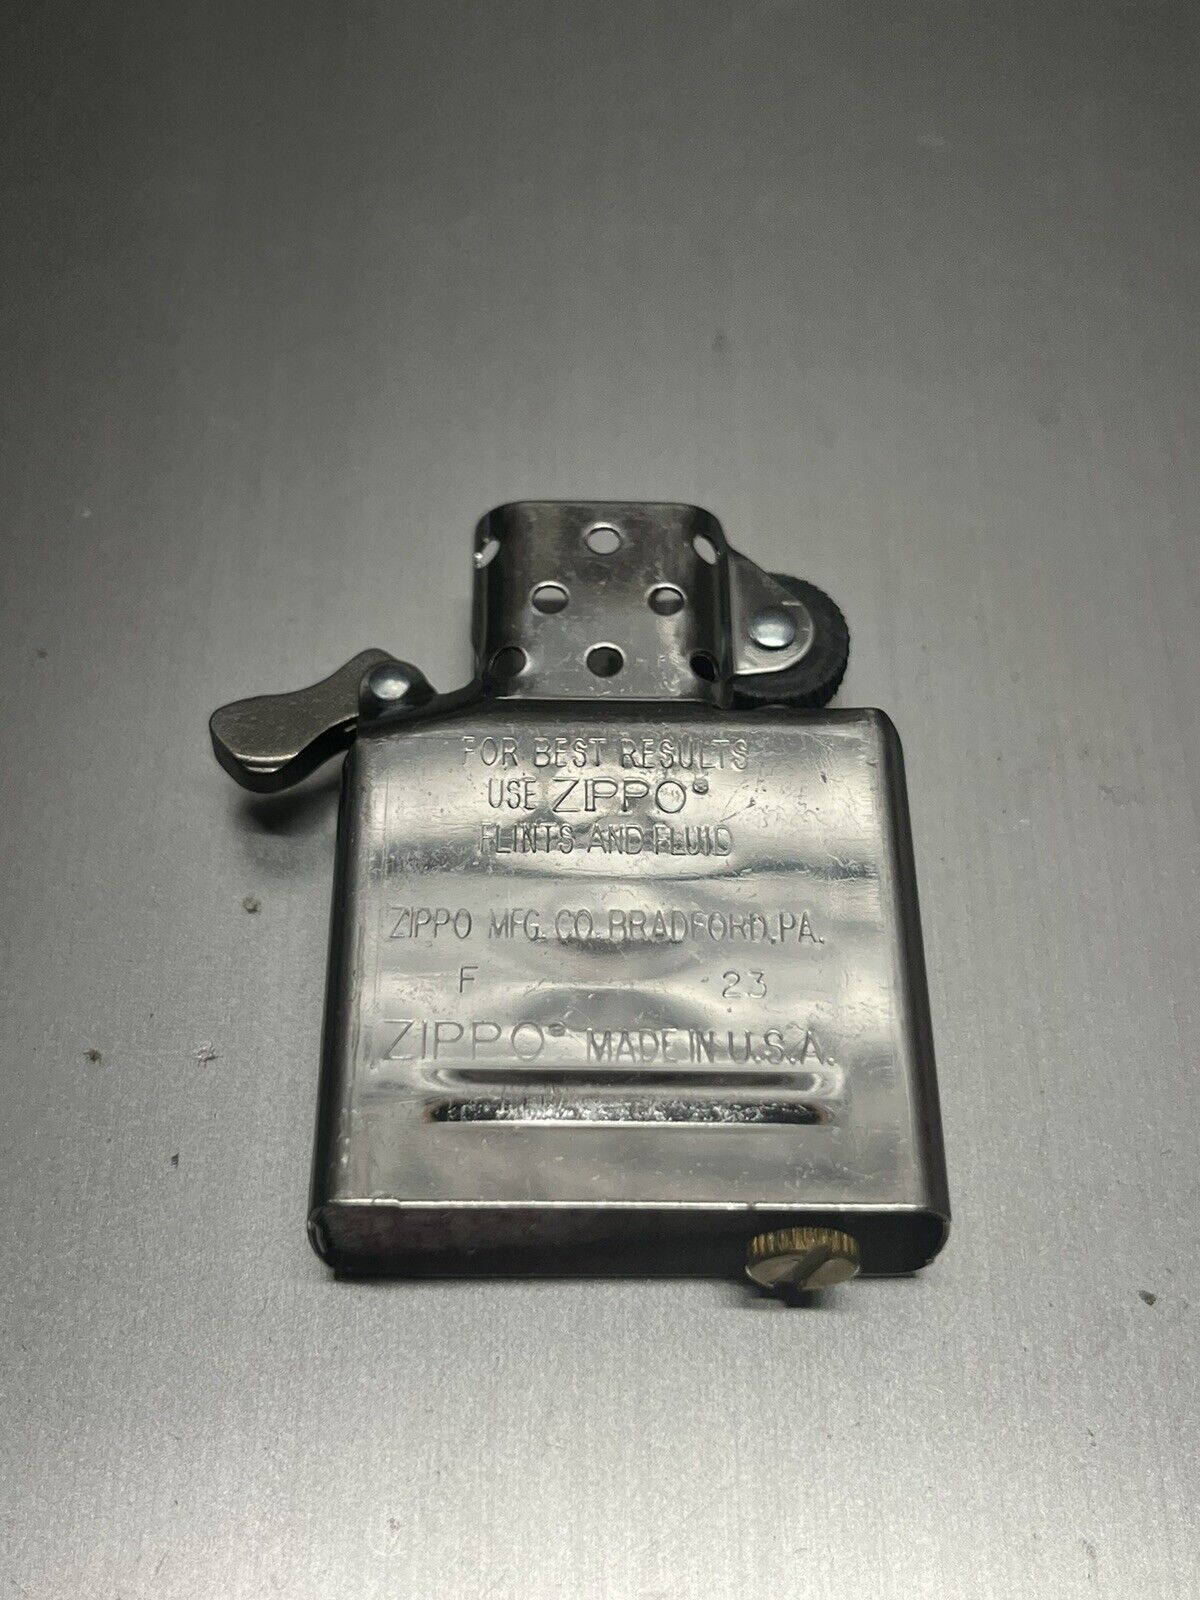 New Authentic Zippo replacement fluid lighter insert brand new never used. Available Now for 5.95